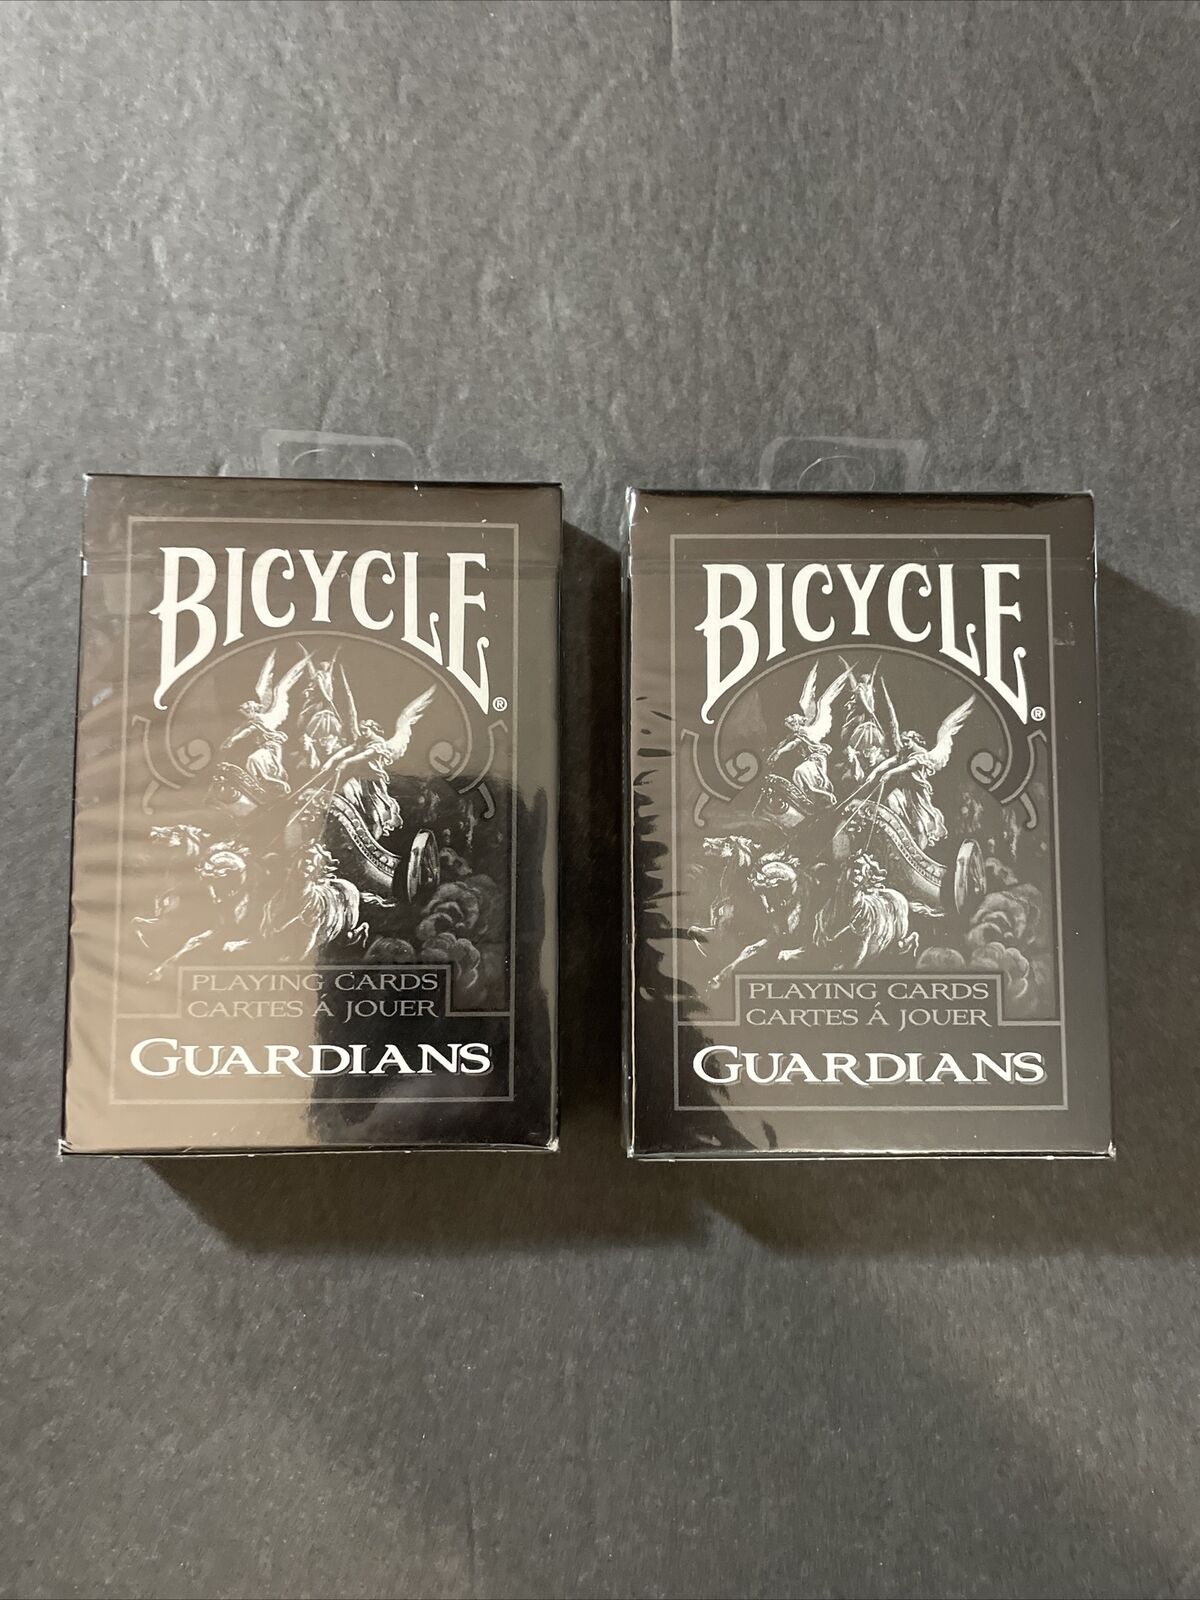 Bicycle Guardians Poker Theory 11 Limited Edition Playing Cards 2 Sealed Decks